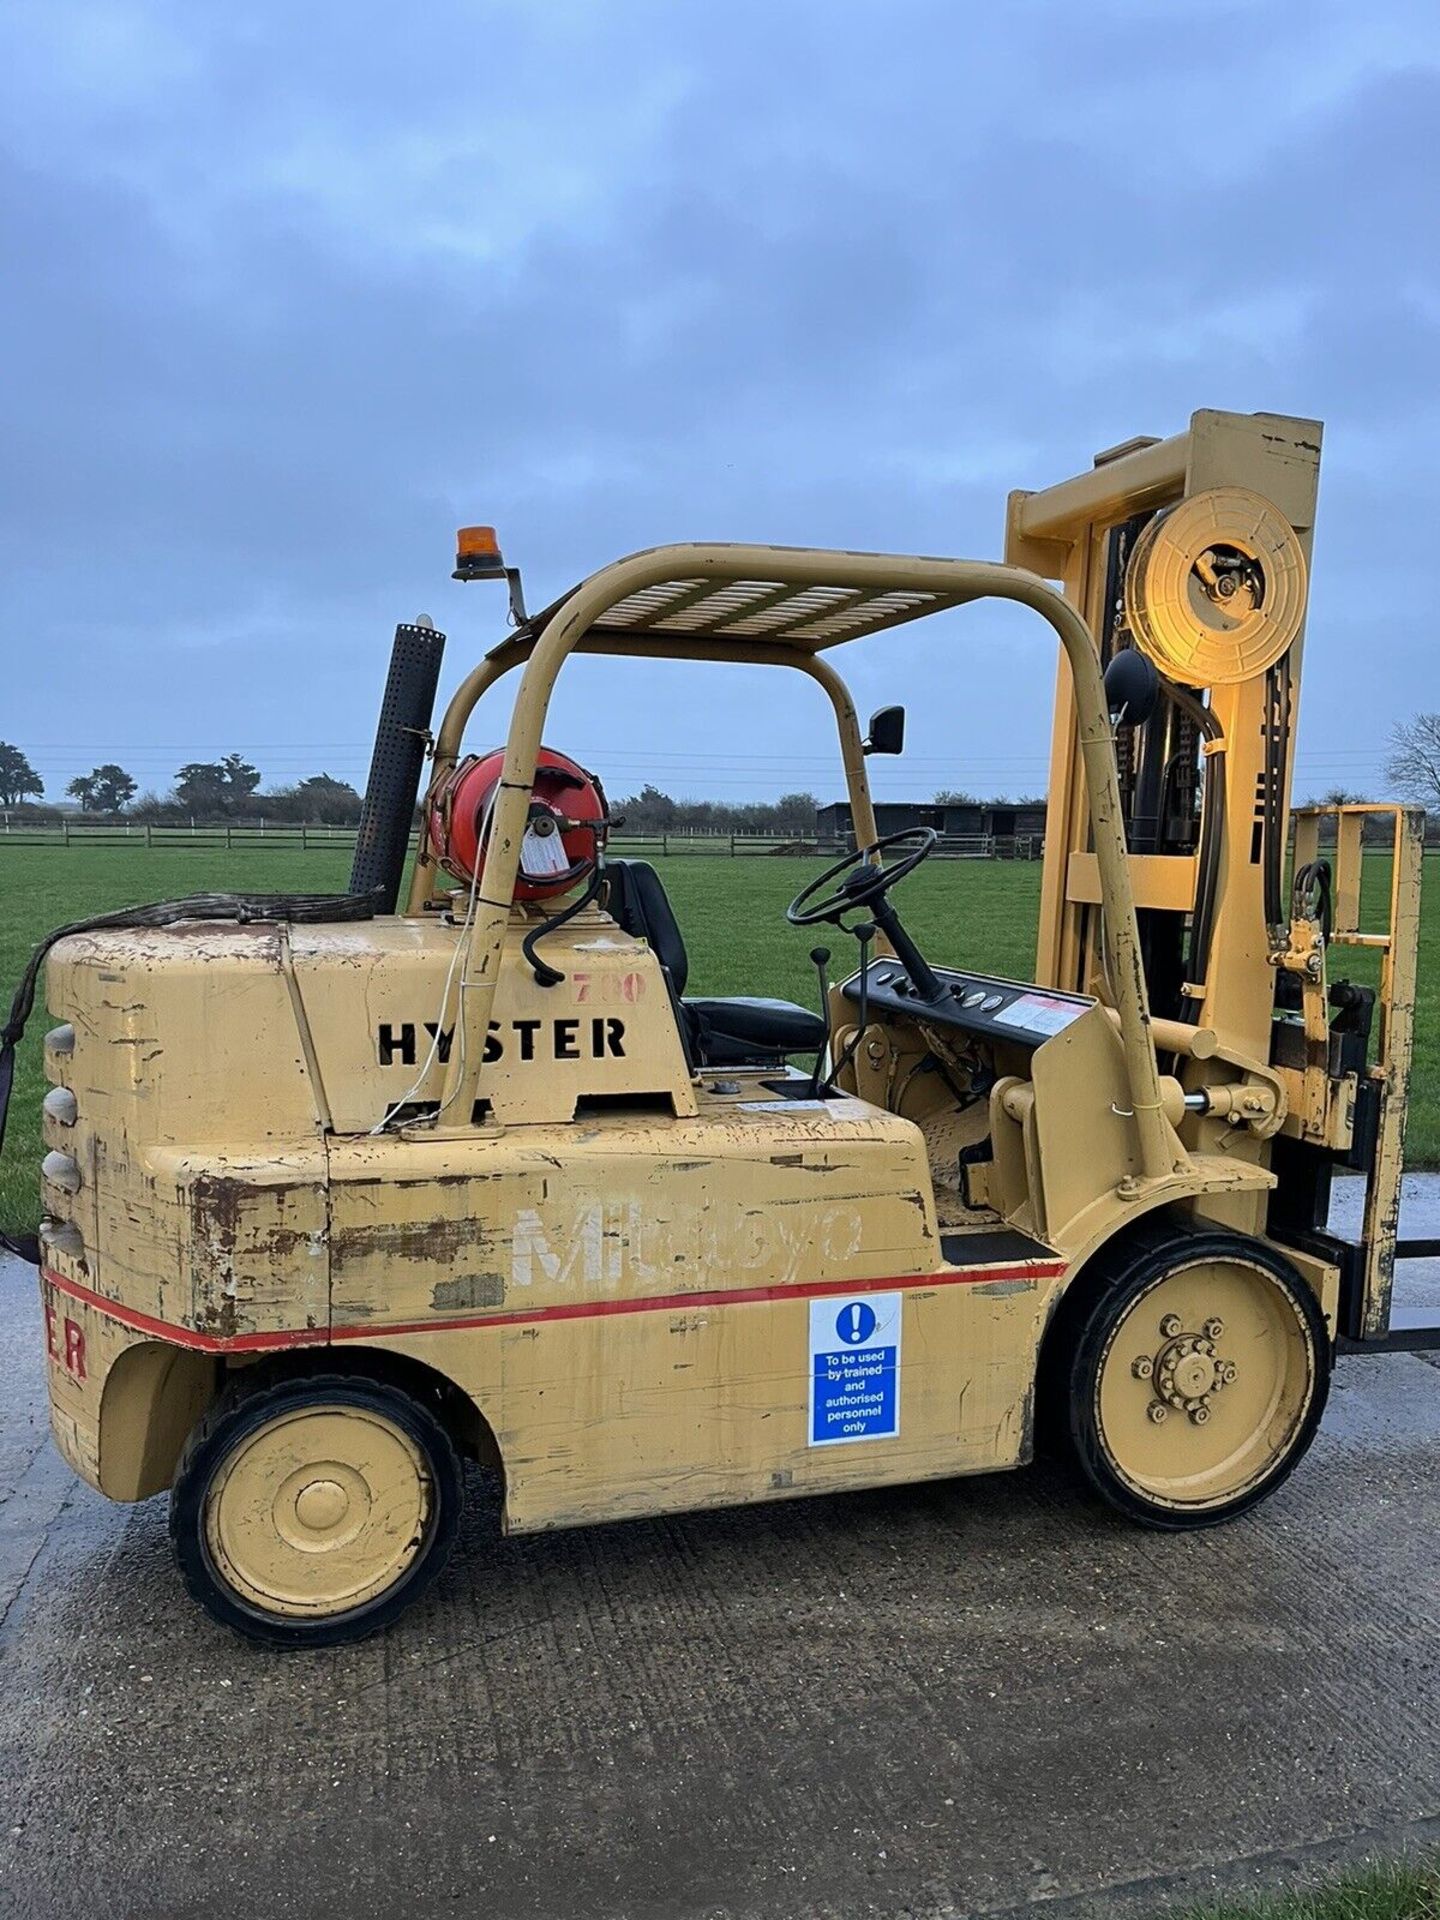 Hyster 7 Tonne Gas Forklift Compact Specialist Truck - Image 2 of 5